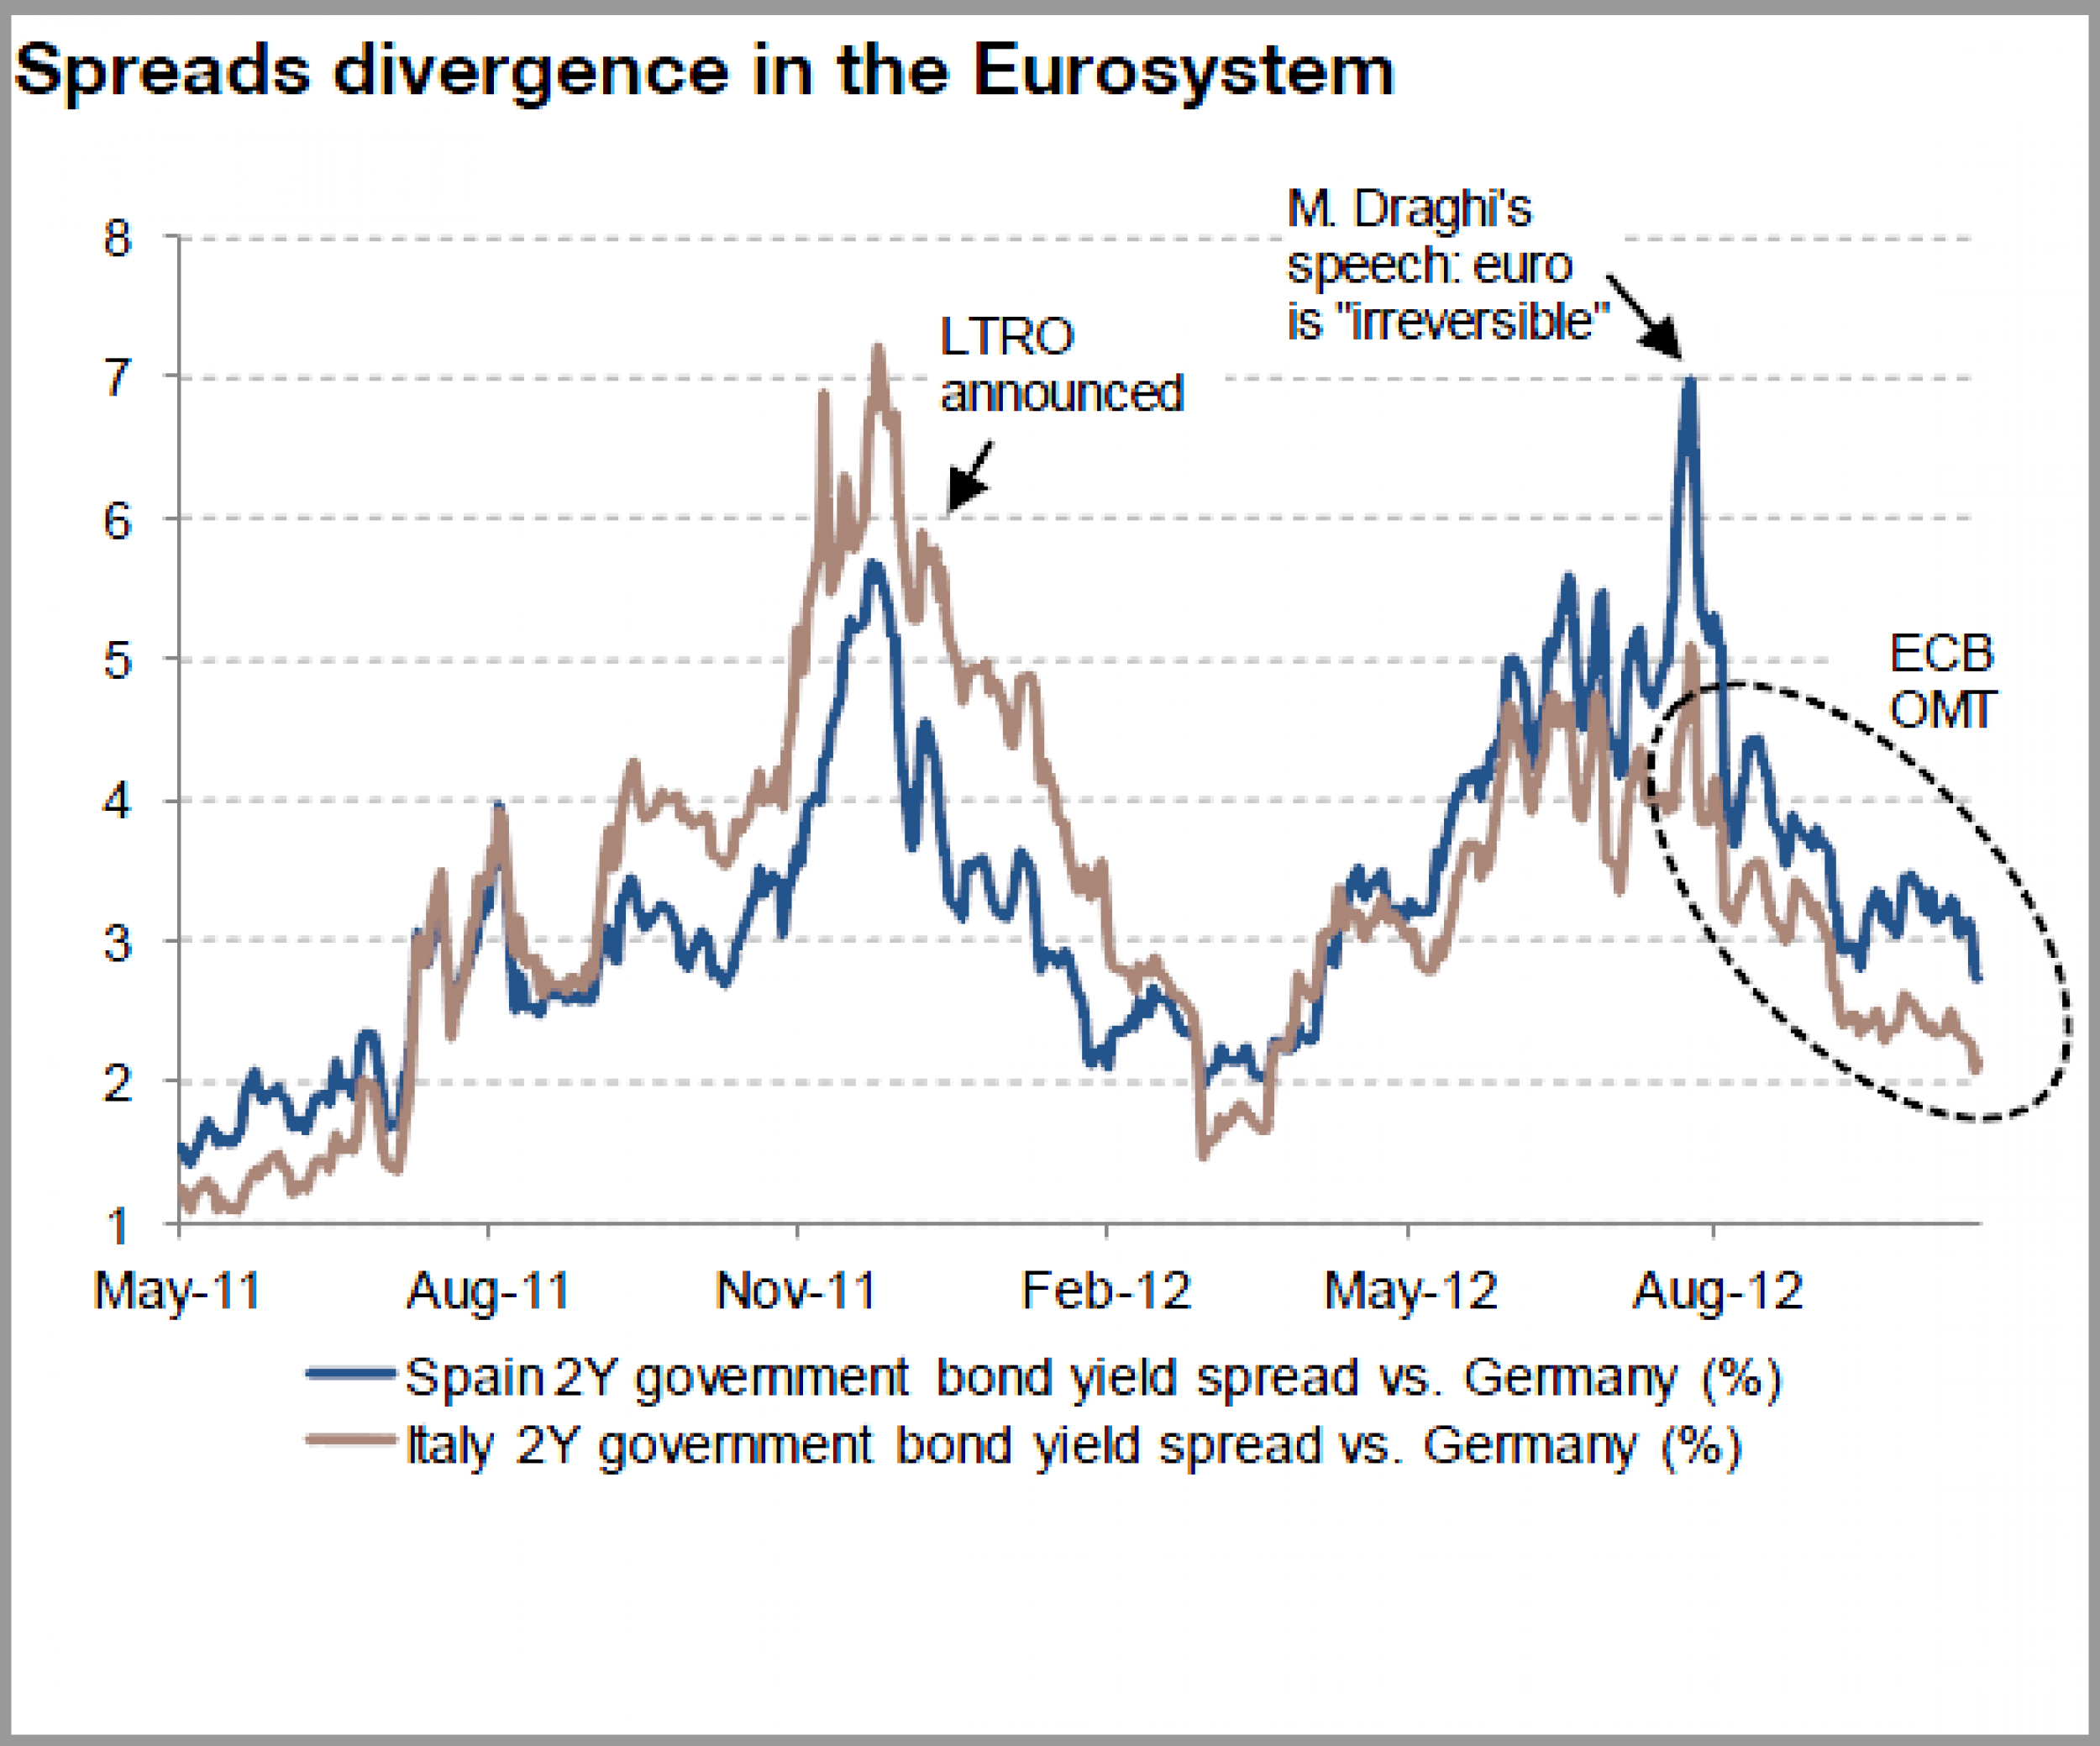 Hurdles in transmission of ECB monetary policy